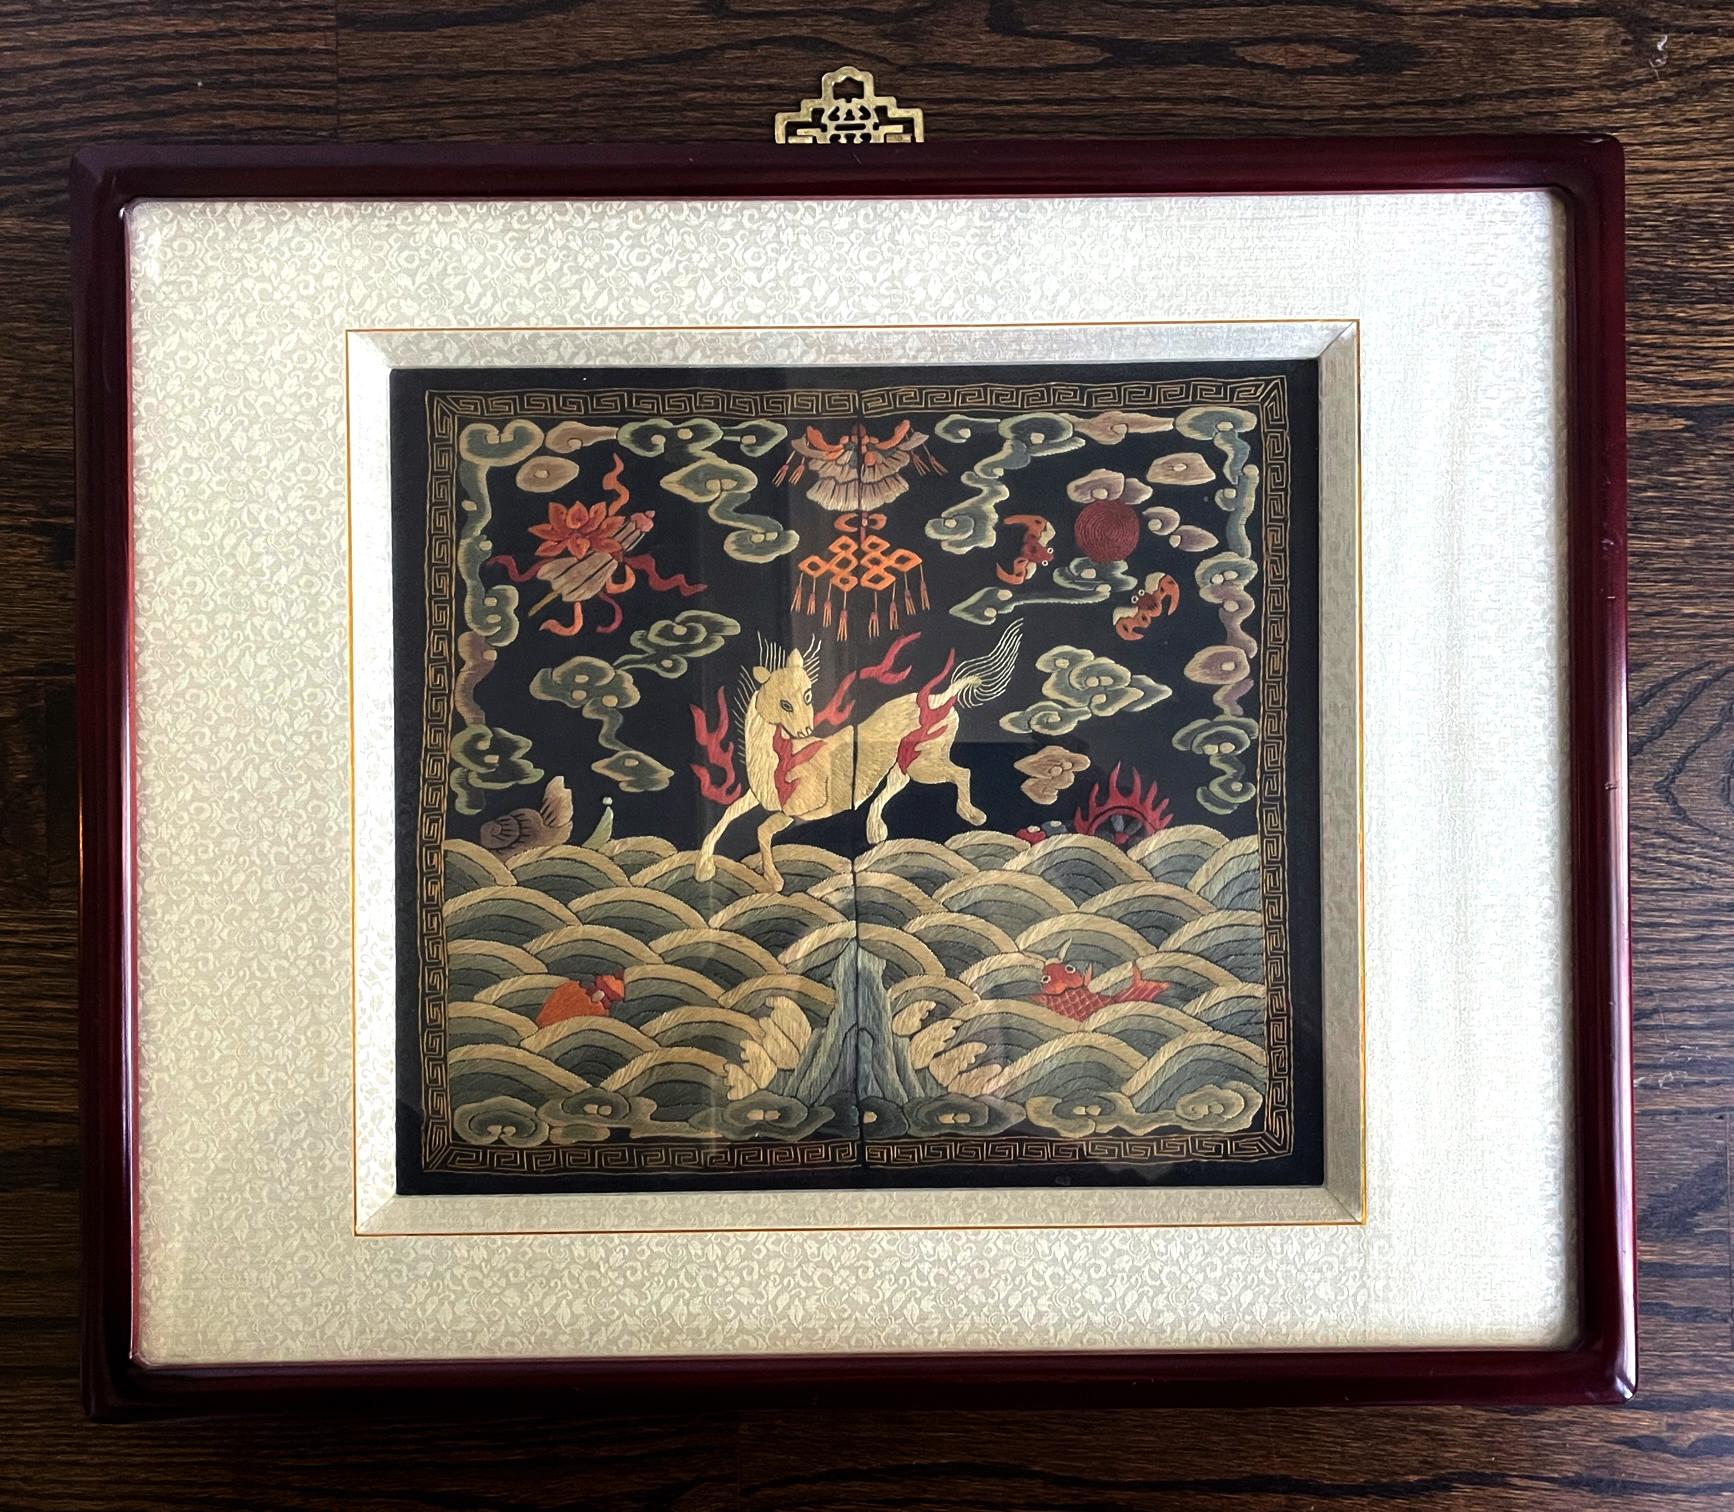 A finely embroidered silk military rank badge panel framed in a wood frame circa late Qing dynasty 19th century. The square rank badge is known in Chinese as Buzi which was displayed in the front and back of the official robe to indicate one's rank